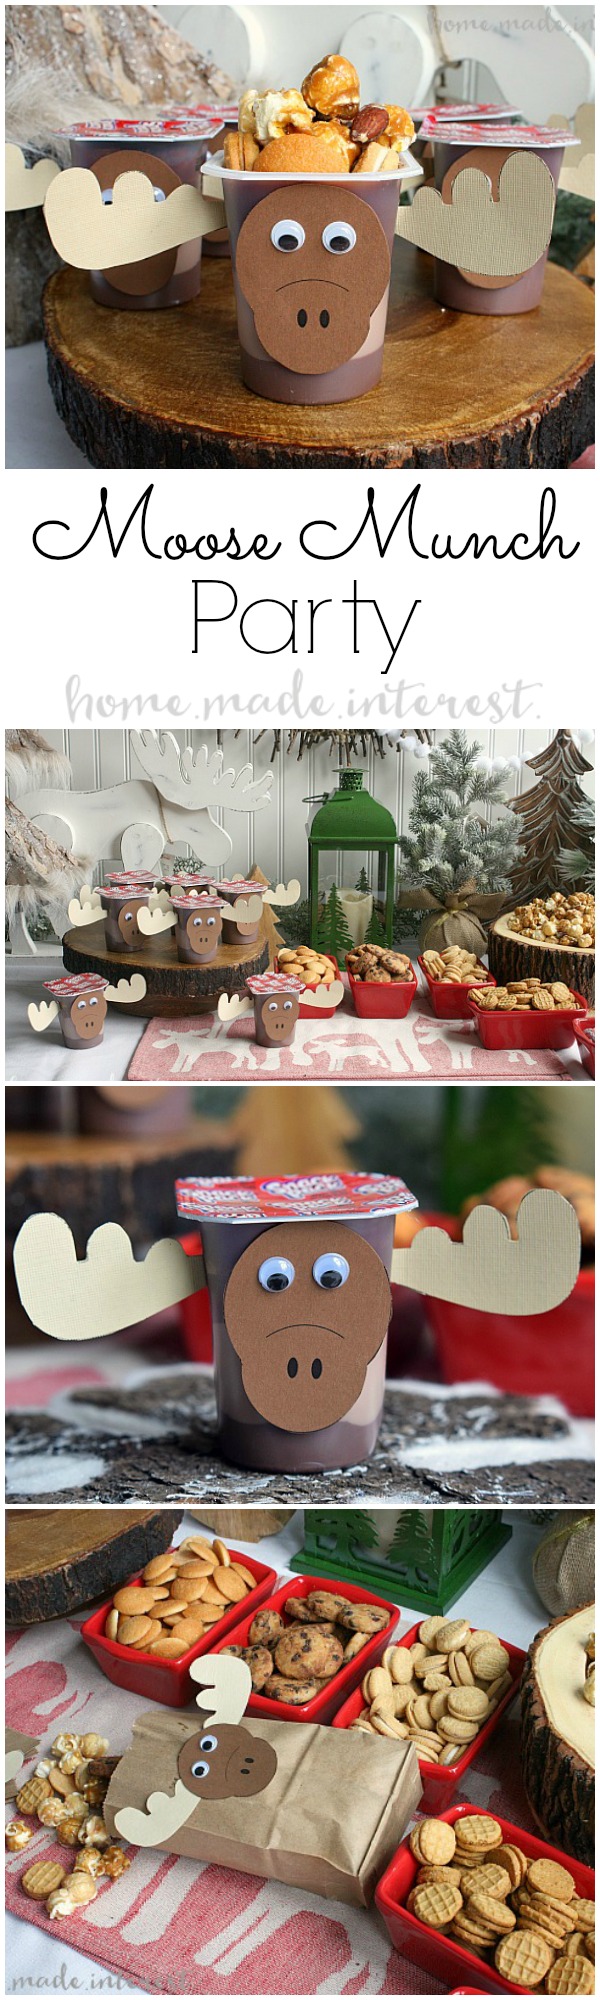 This Moose Munch Holiday Party is such a fun theme for a holiday party where kids and adults can have a good time. Make your own Moose munch and load up your chocolate “moose” then dig in! We’ve even got a few moose printables to get you started.